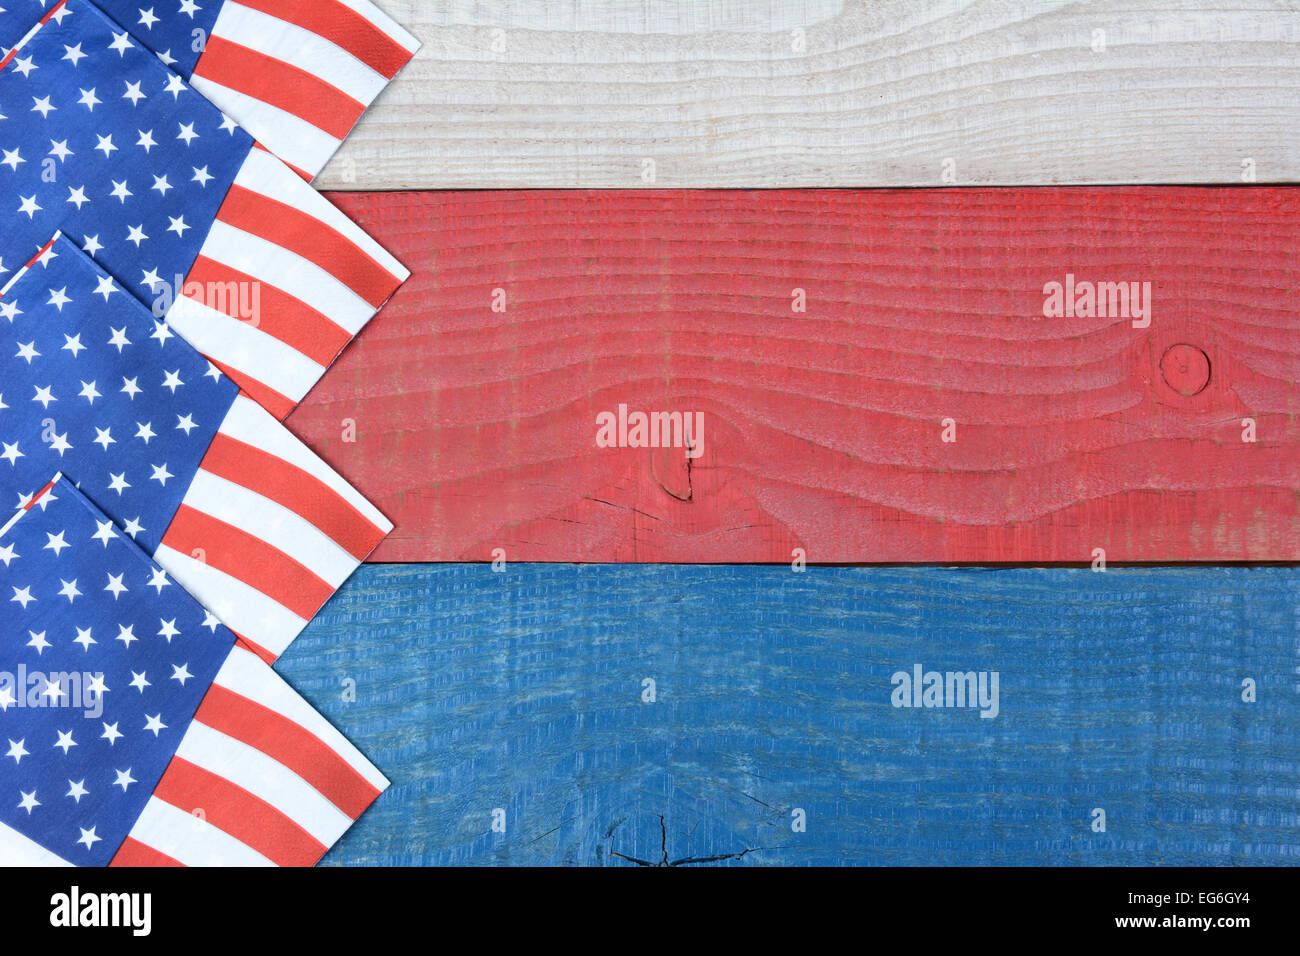 Overhead shot of American Flag napkins spread out on a red, white and blue picnic table. Horizontal format with copy space. Suit Stock Photo